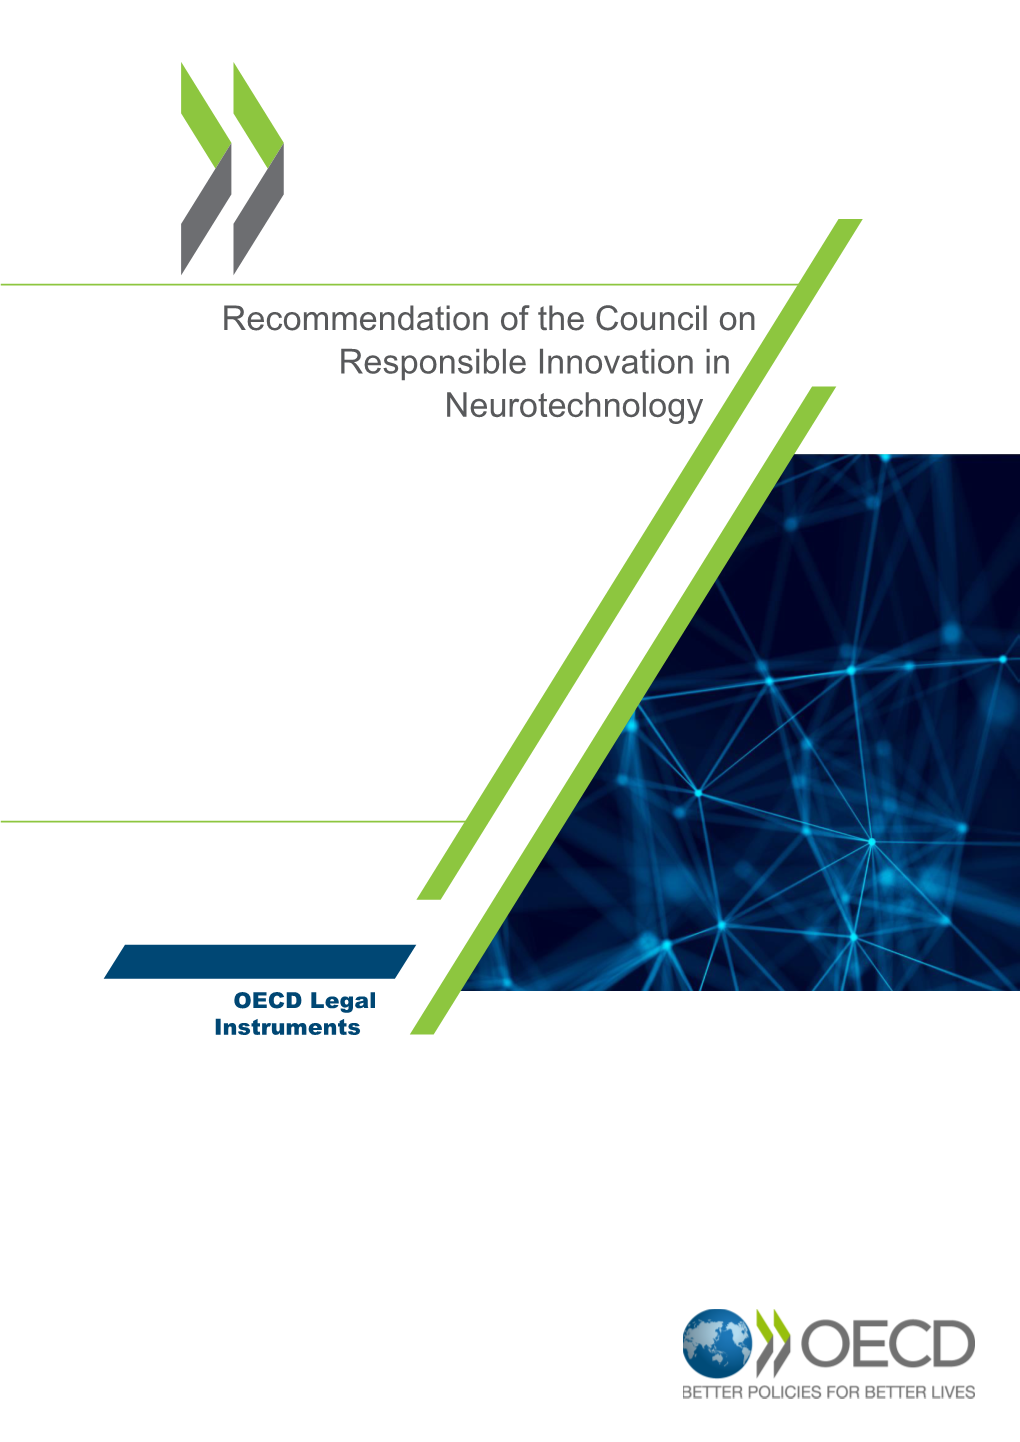 Recommendation of the Council on Responsible Innovation in Neurotechnology